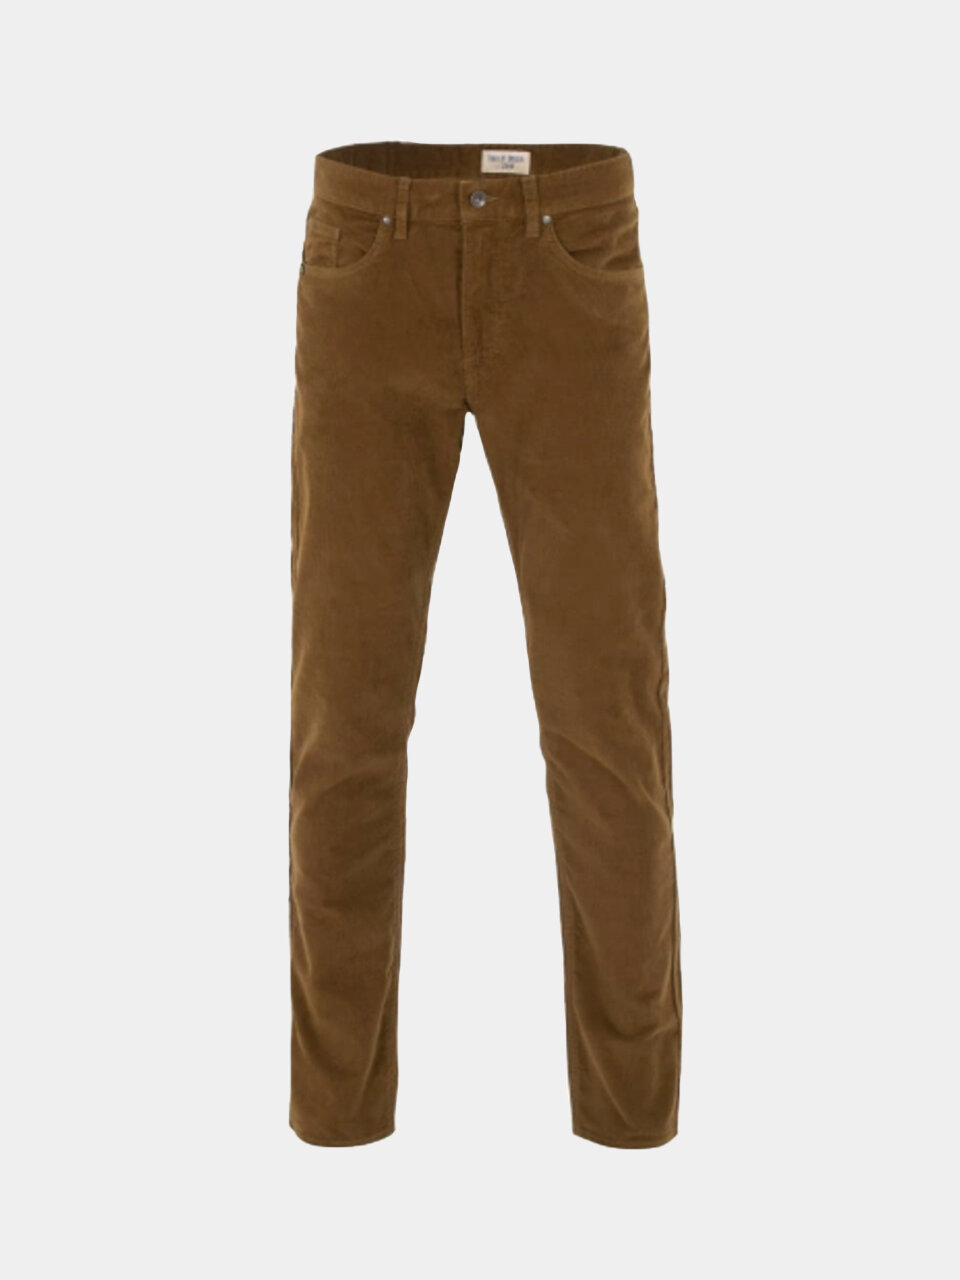 Tiger of Sweden - Rex Corduroy Trousers